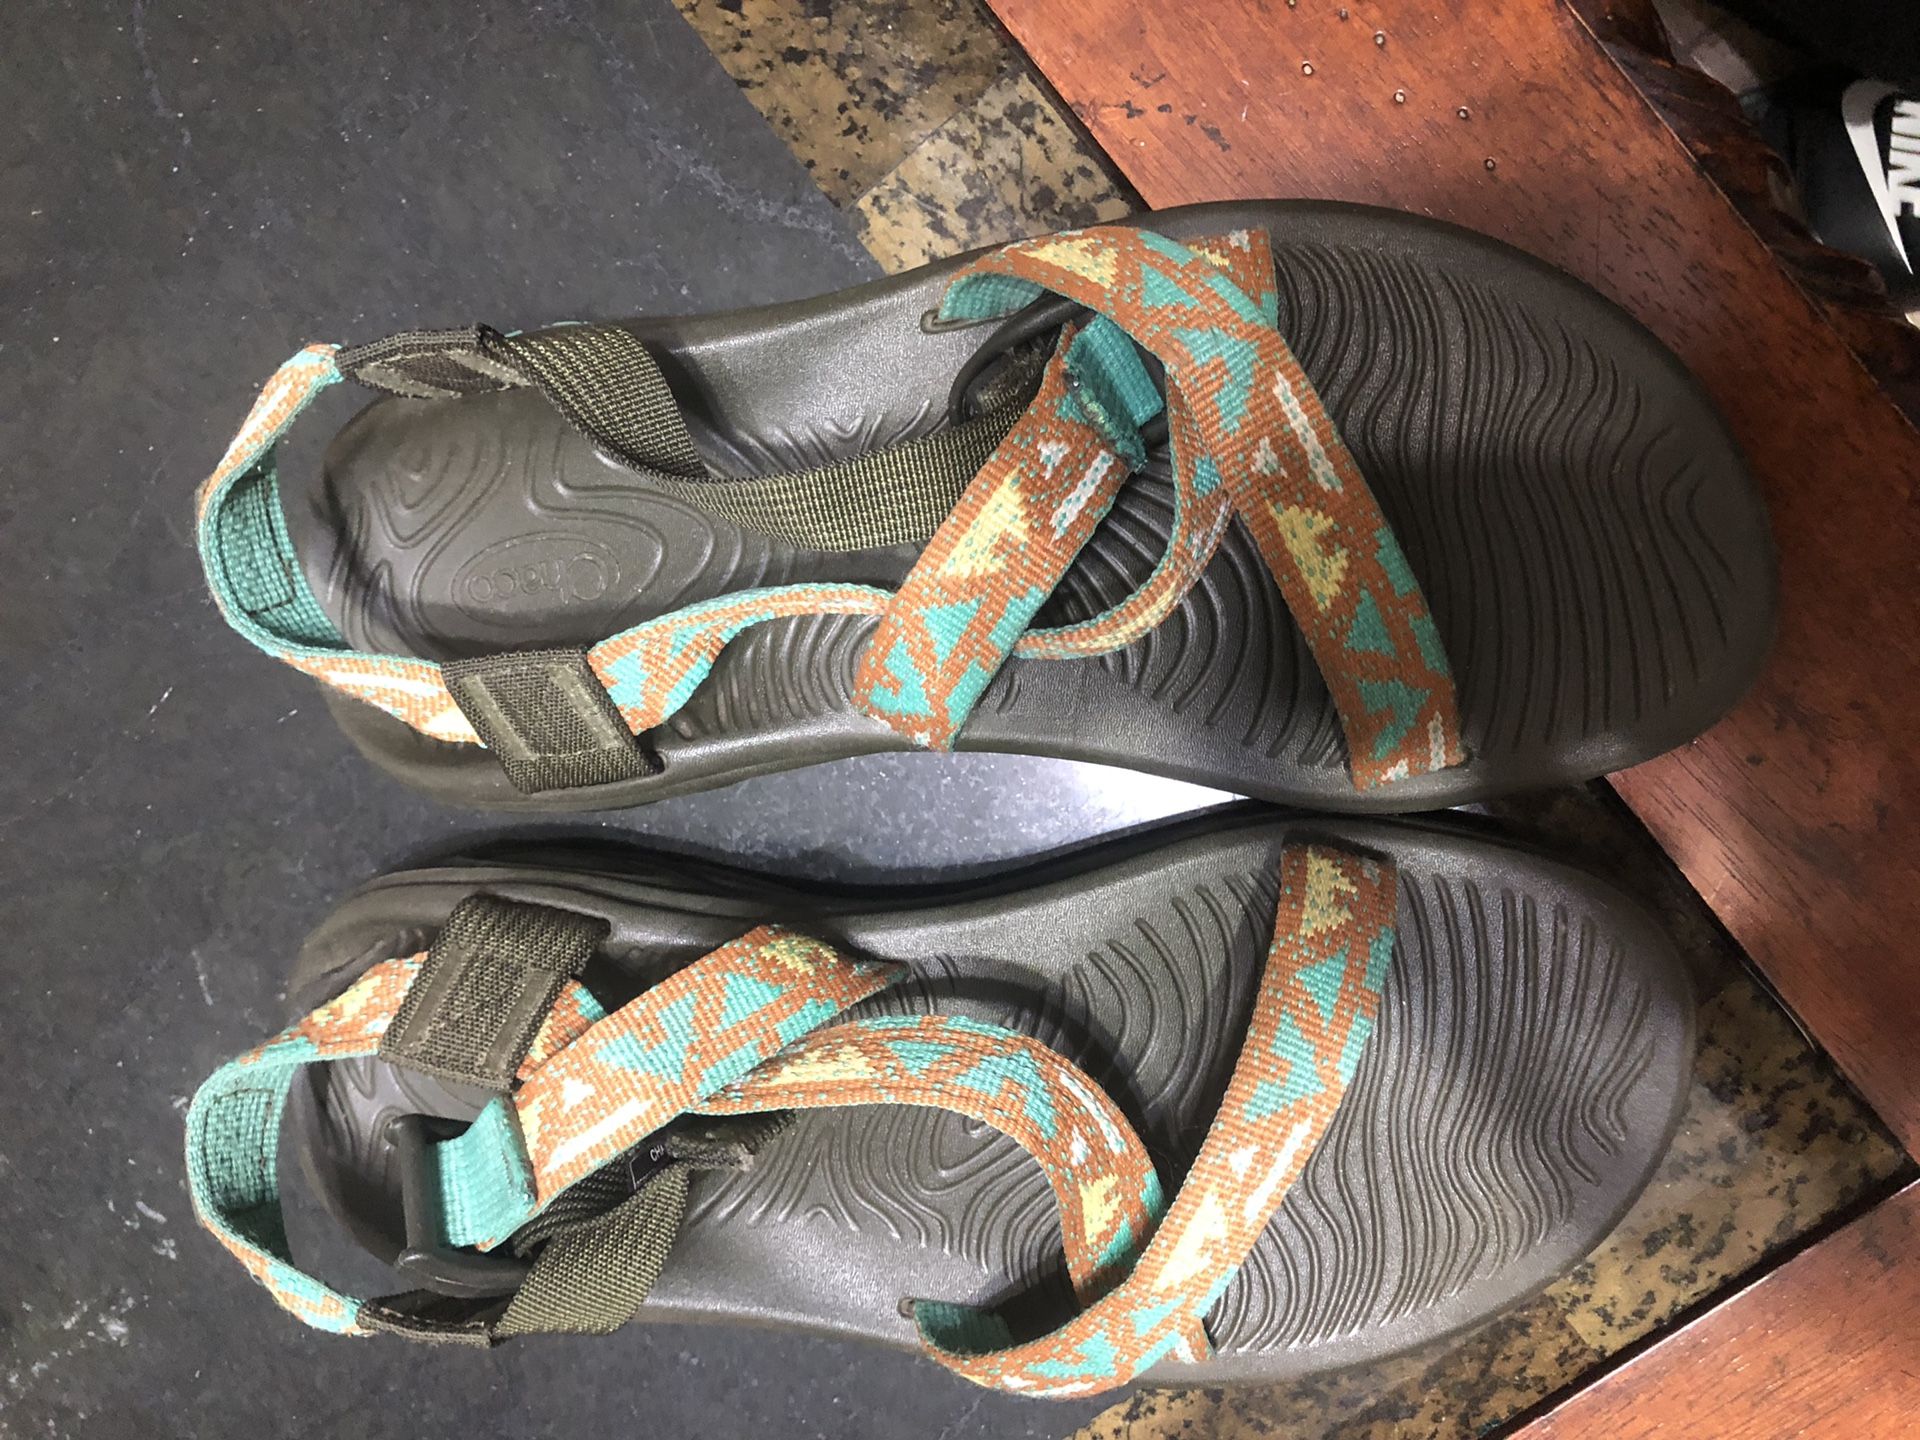 Chaco sandals for women size 8